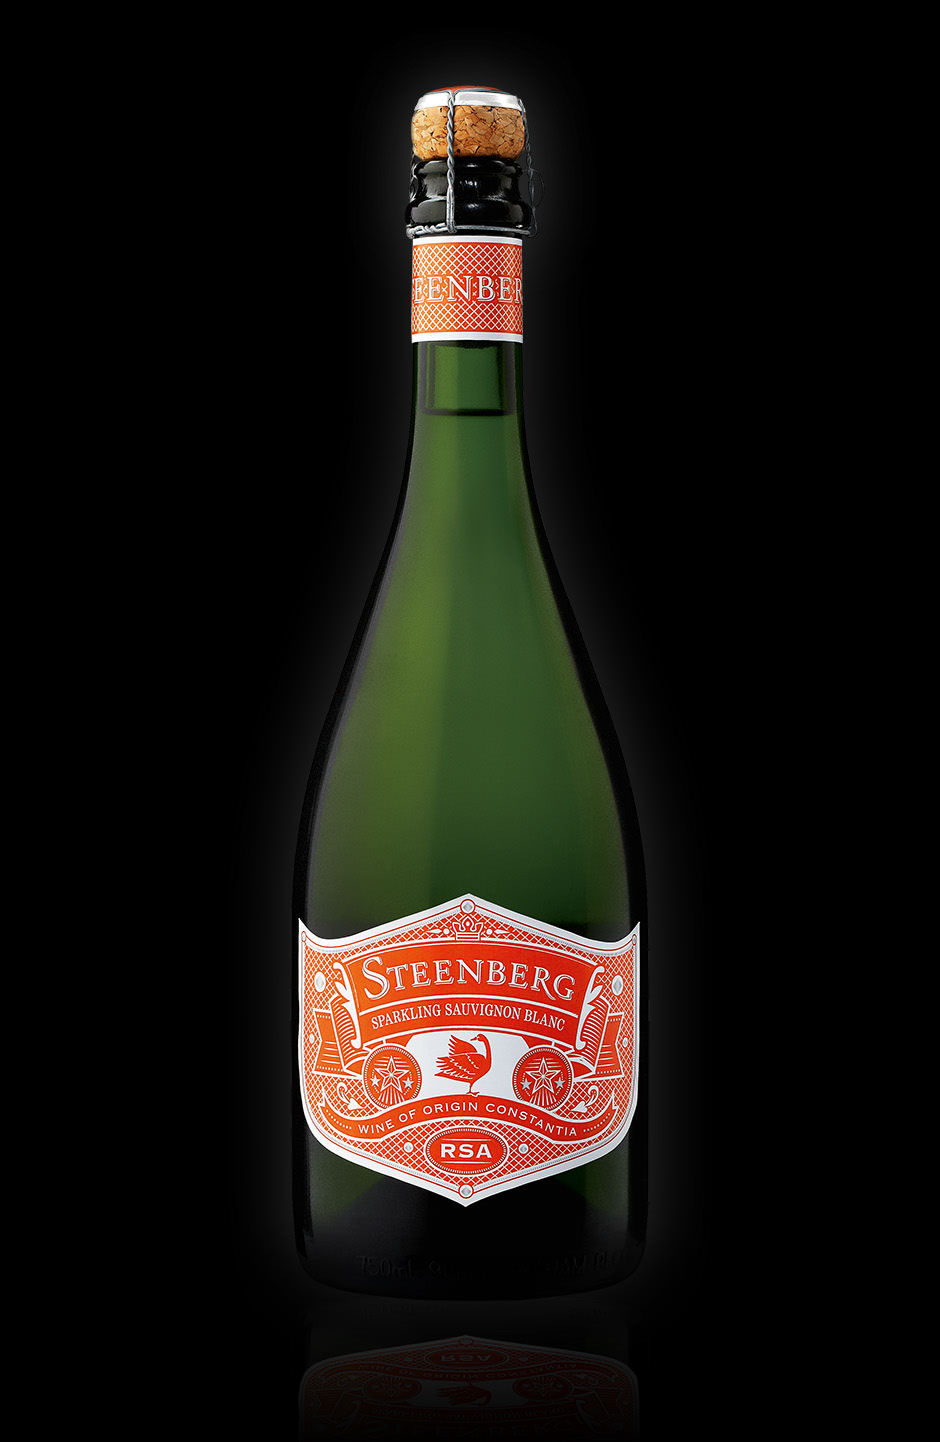 Steenberg constantia south africa wine sparkling wine Rsa Champagne Goose box